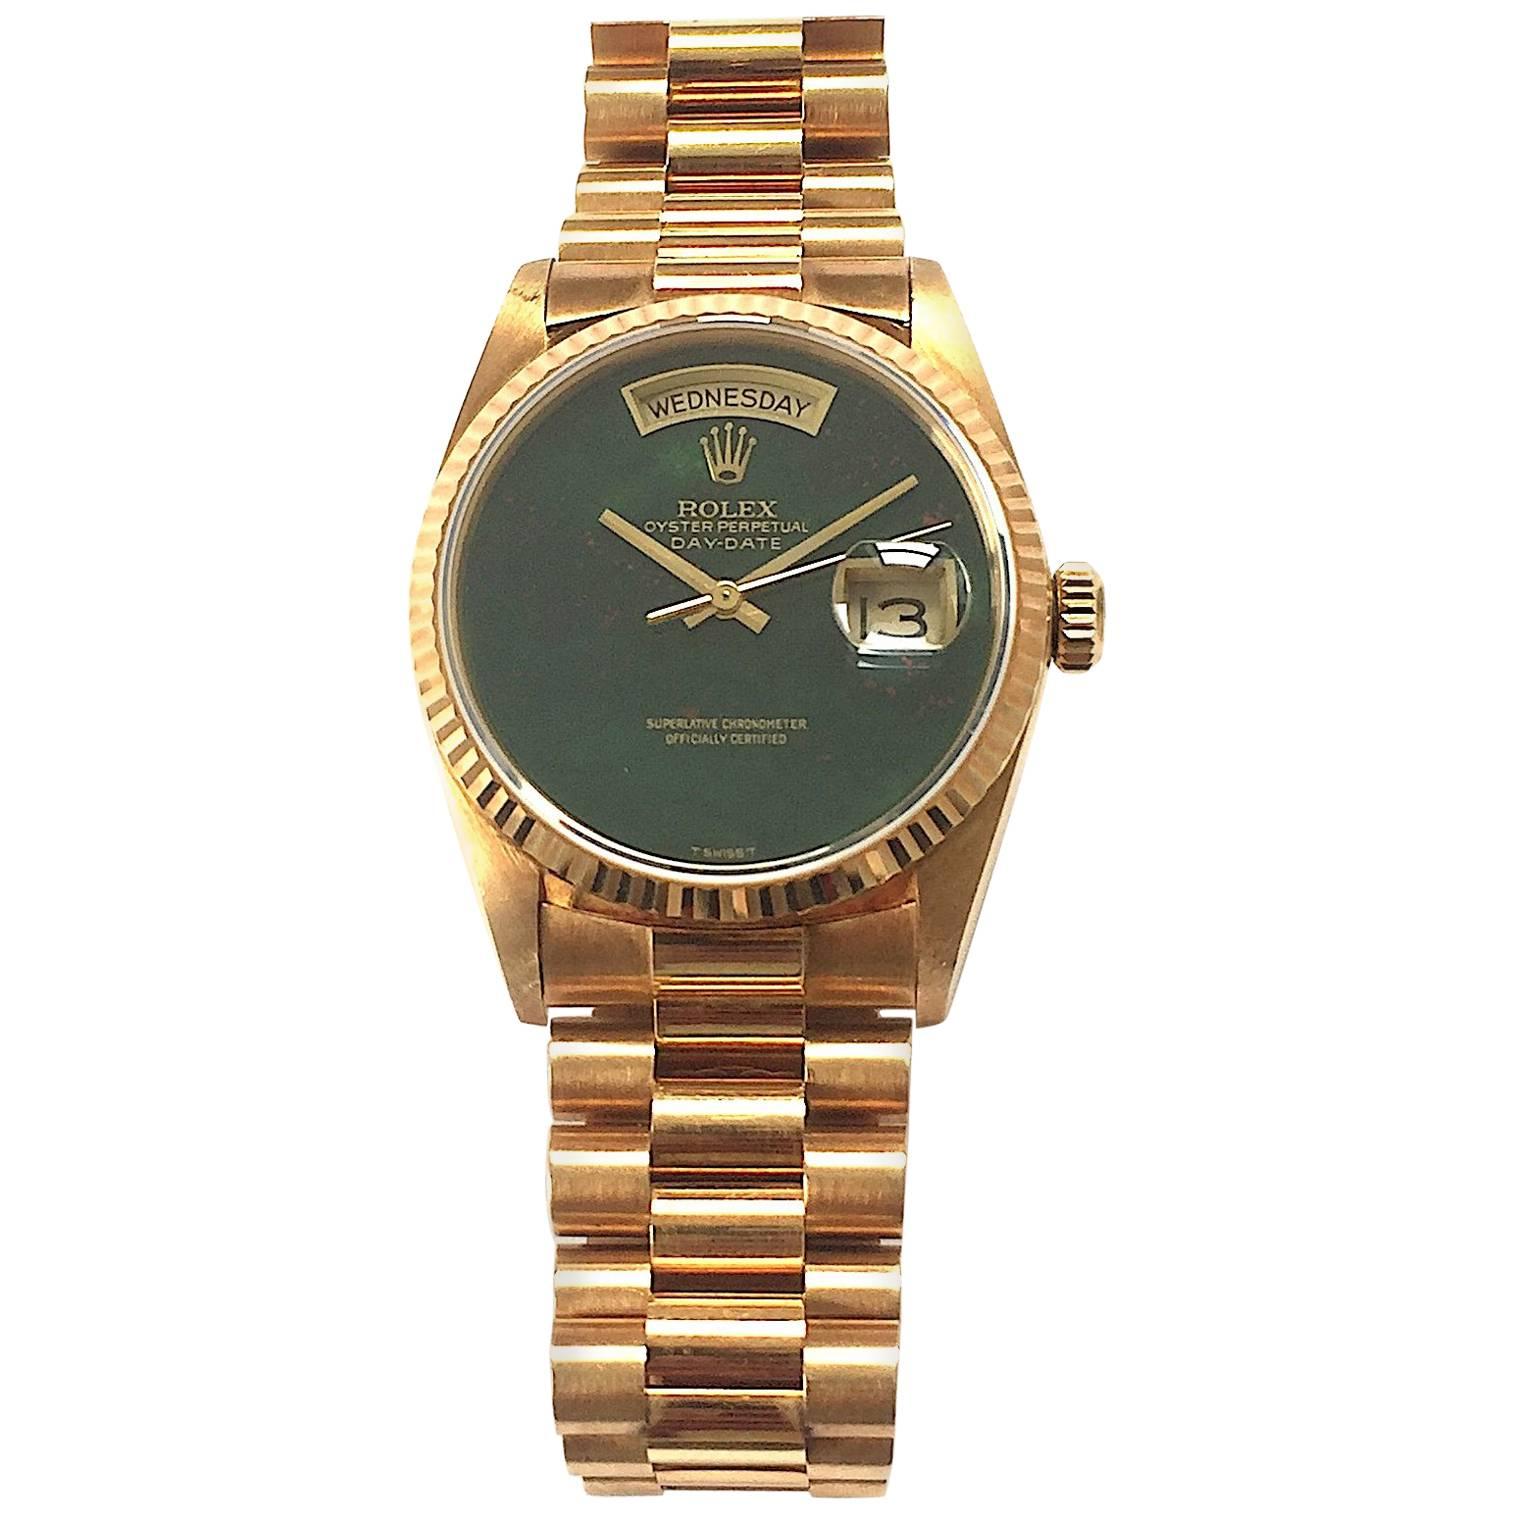 Rolex 18K Yellow Gold Day-Date Presidential Watch
Rare Factory Rolex Bloodstone Heliotrope Dial without Hour Markers
Bloodstone Is One Of The Rarest Rolex Stone Dials Produced
The Dial  Has a Small Crack Seen with A Loupe and Under Magnification at